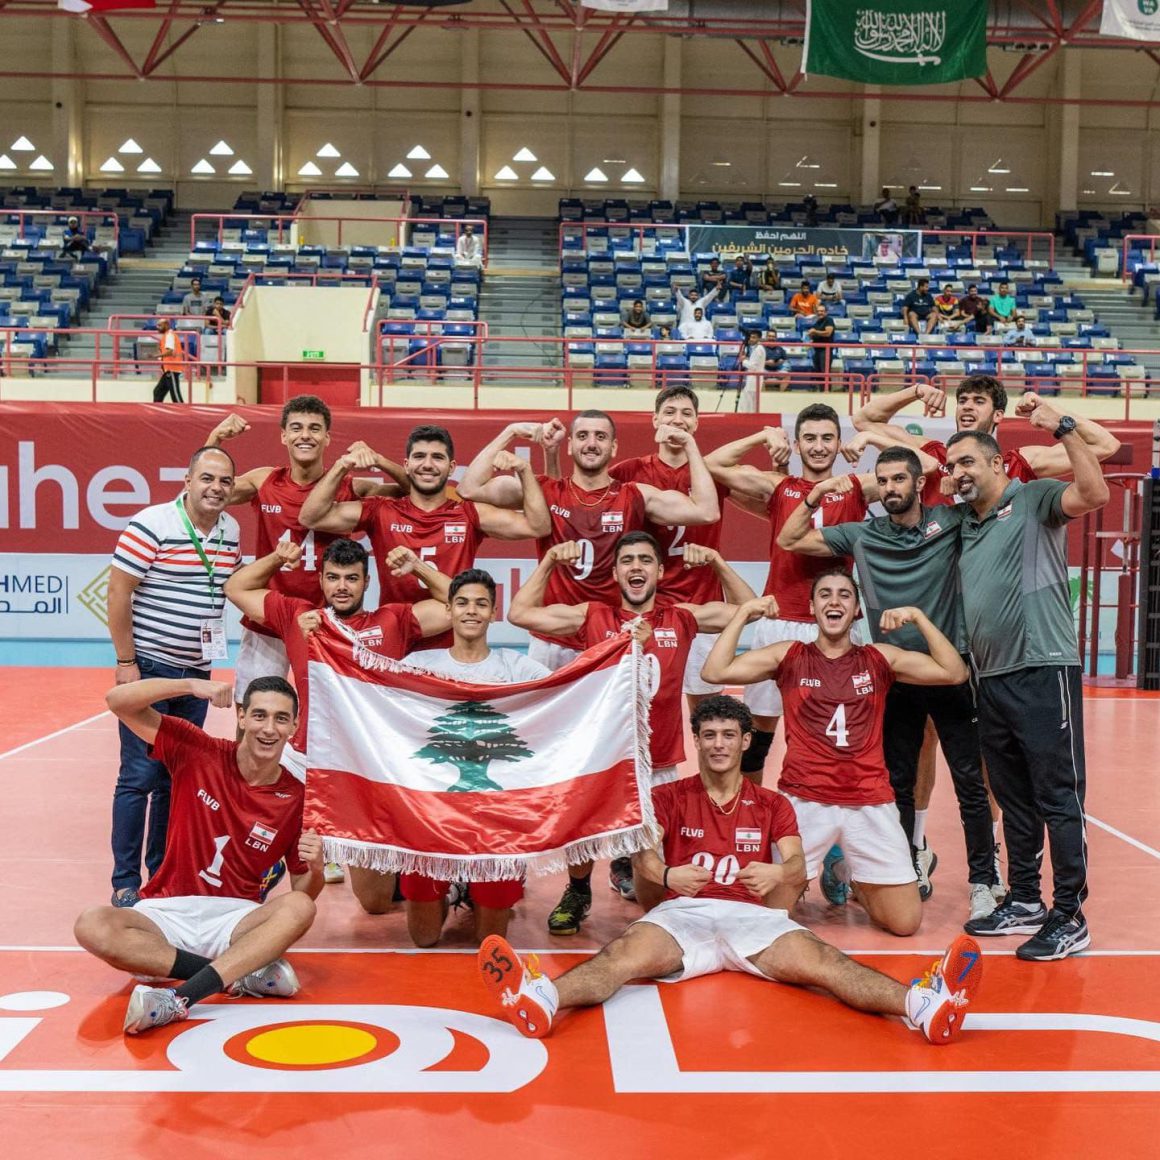 TUESDAY’S EAGERLY-ANTICIPATED MATCHES DETERMINE QUARTERFINALISTS AT 1ST WEST ASIA MEN’S U20 CHAMPIONSHIP IN SAUDI ARABIA